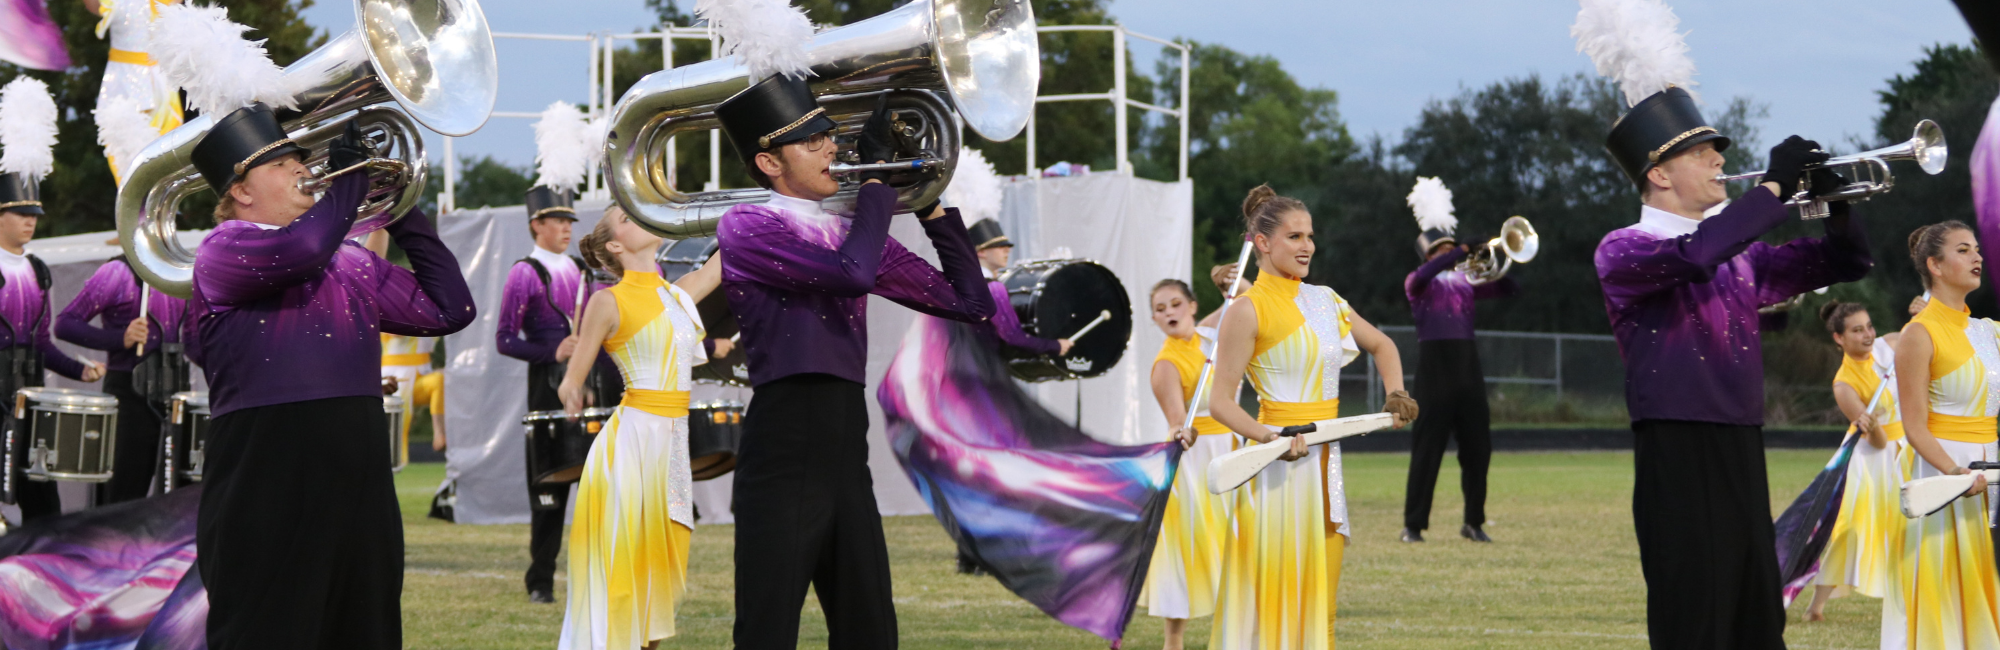 2021 Marching Season Website Slide Show (1400 × 400 px) (2000 × 400 px) (2000 × 650 px)